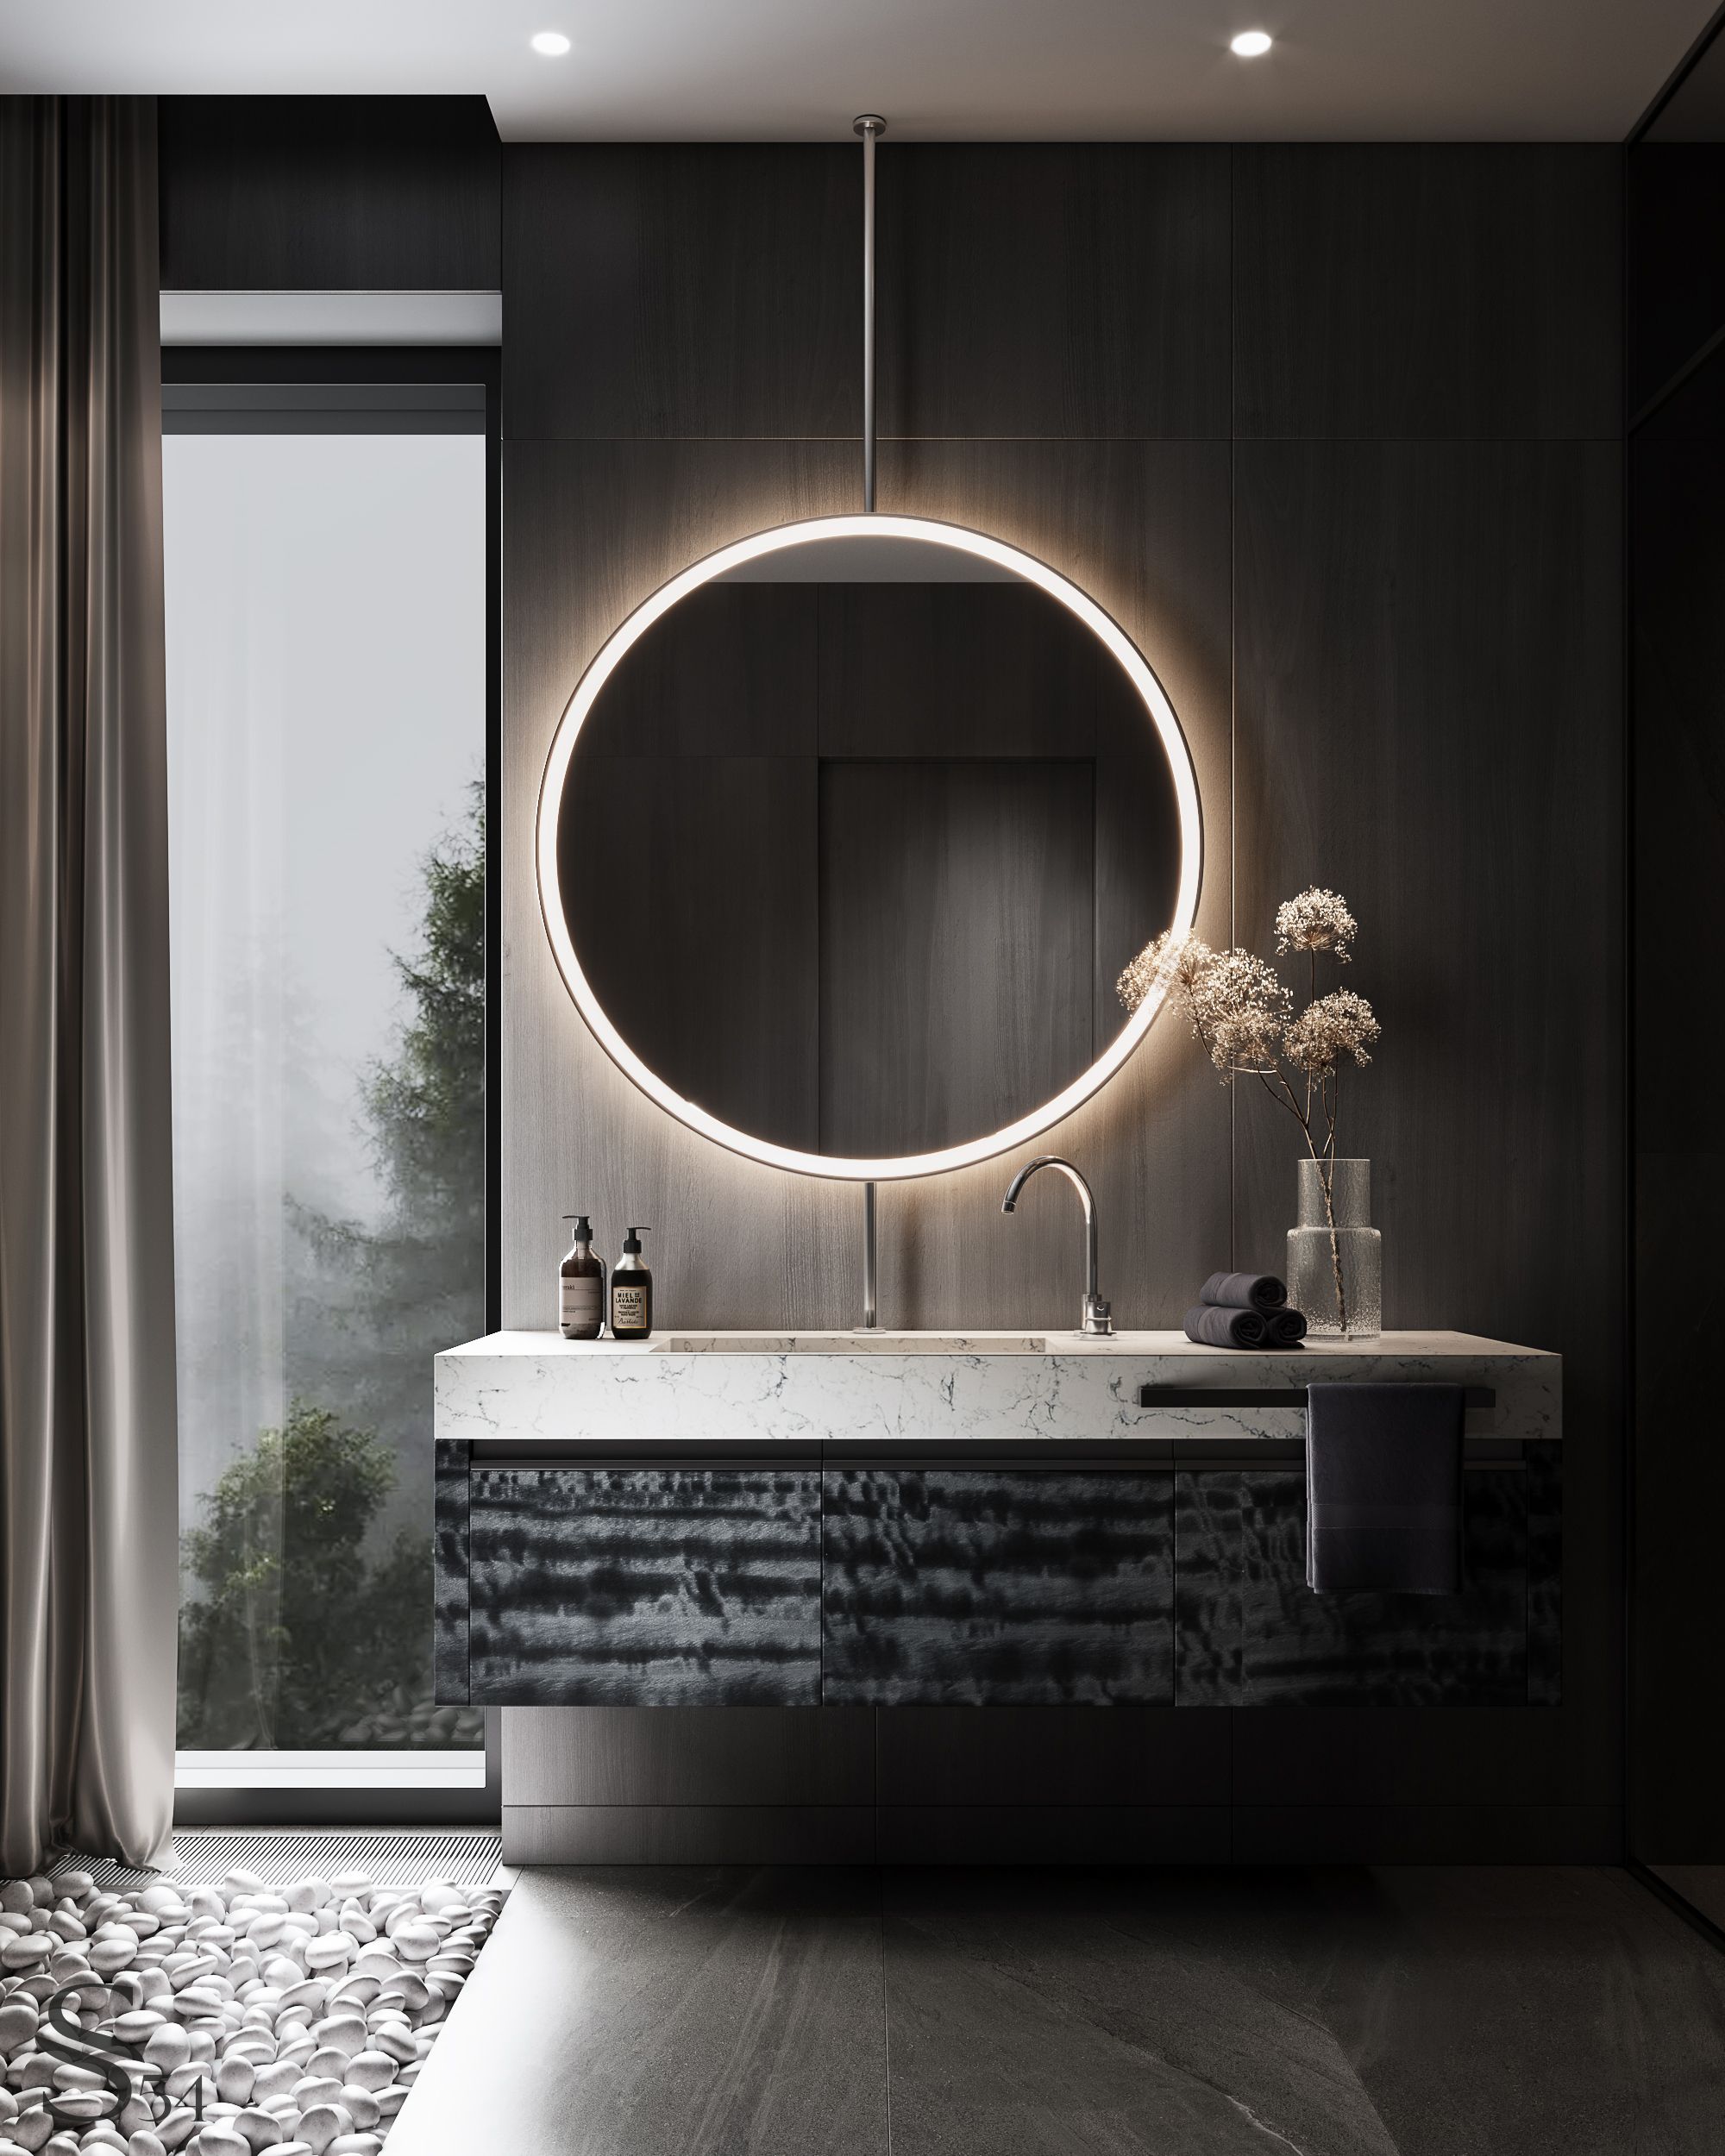 The sink is adorned with veneer from eucalyptus wood—an exclusive material characterized by its distinctive texture that amplifies the interior's natural motif. The panorama beyond the window serves as an awe-inspiring backdrop, an element to be cherished.